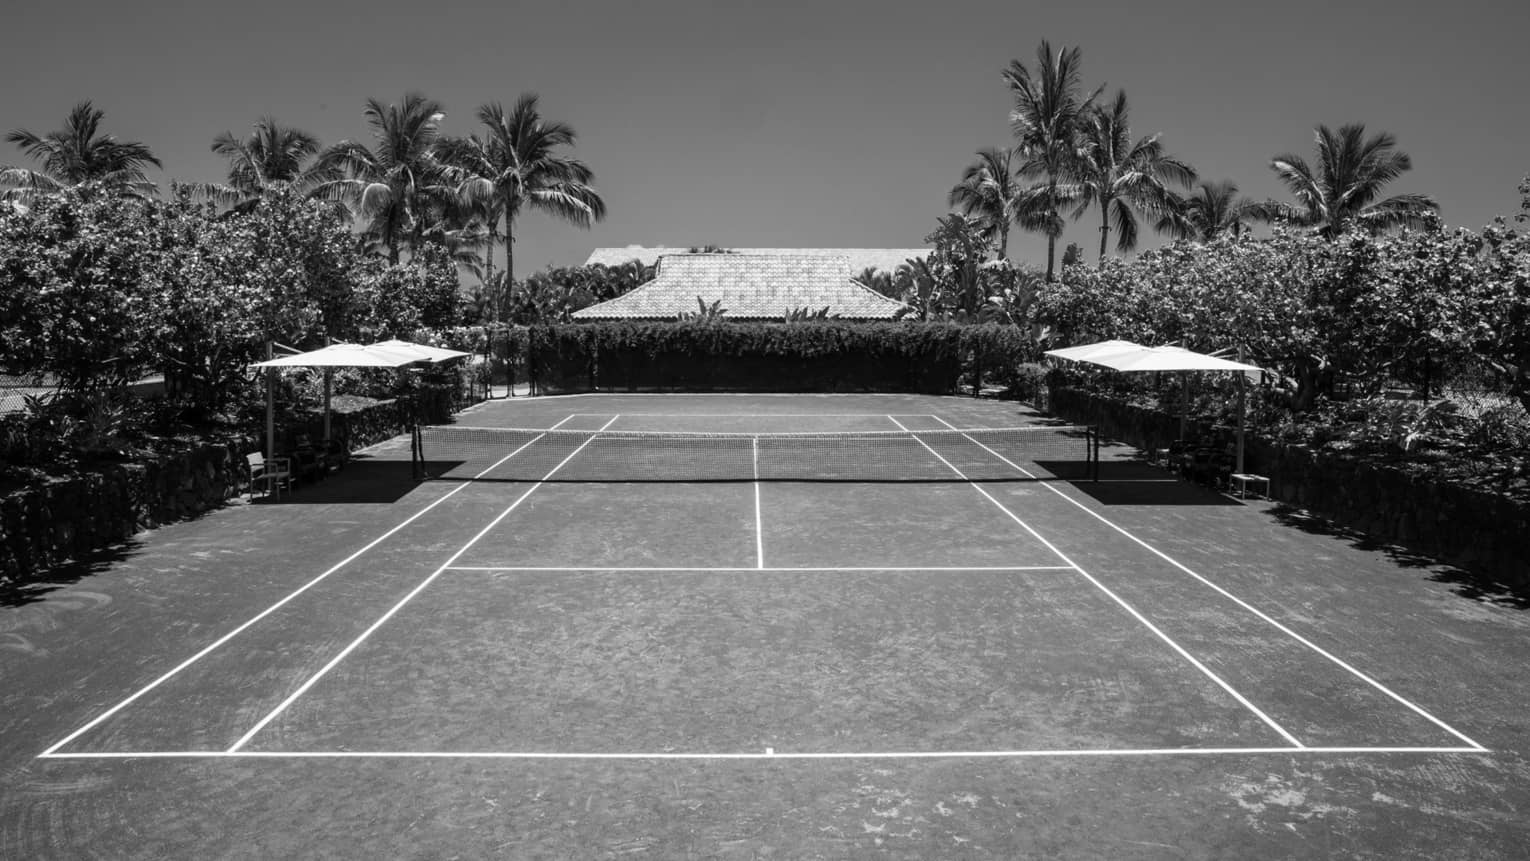 A large tennis court surrounded by palm trees